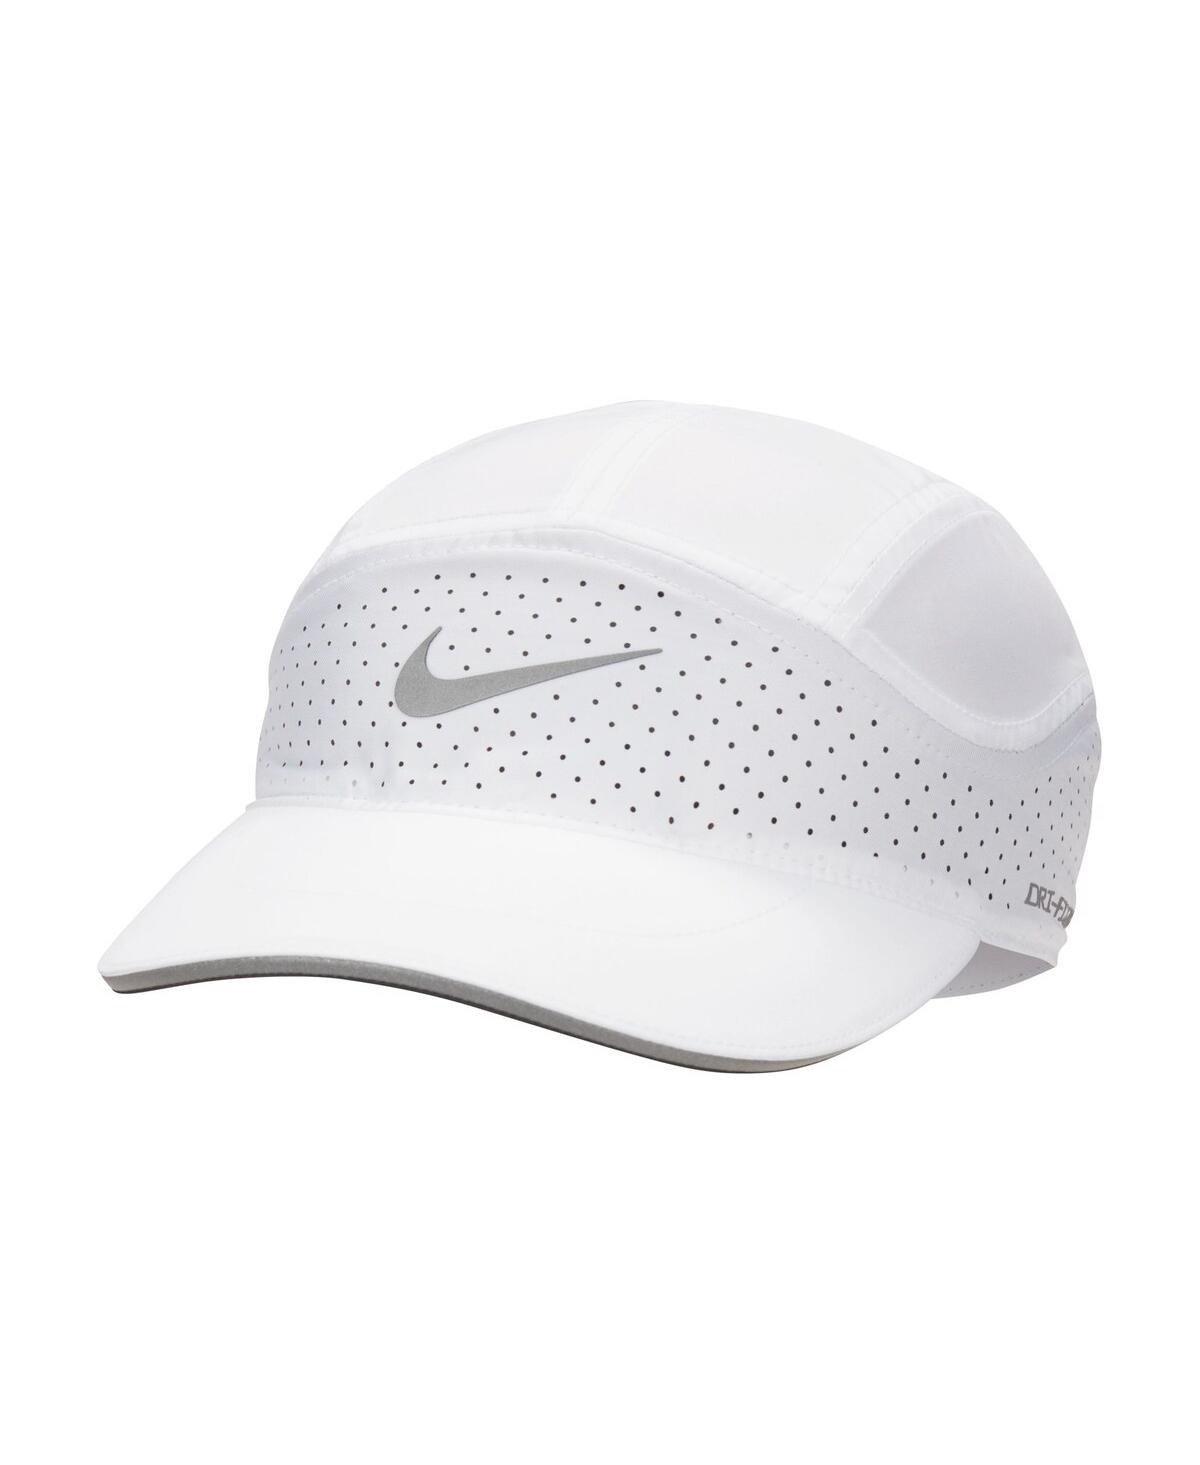 Men's and Women's Nike White Reflective Fly Performance Adjustable Hat - White